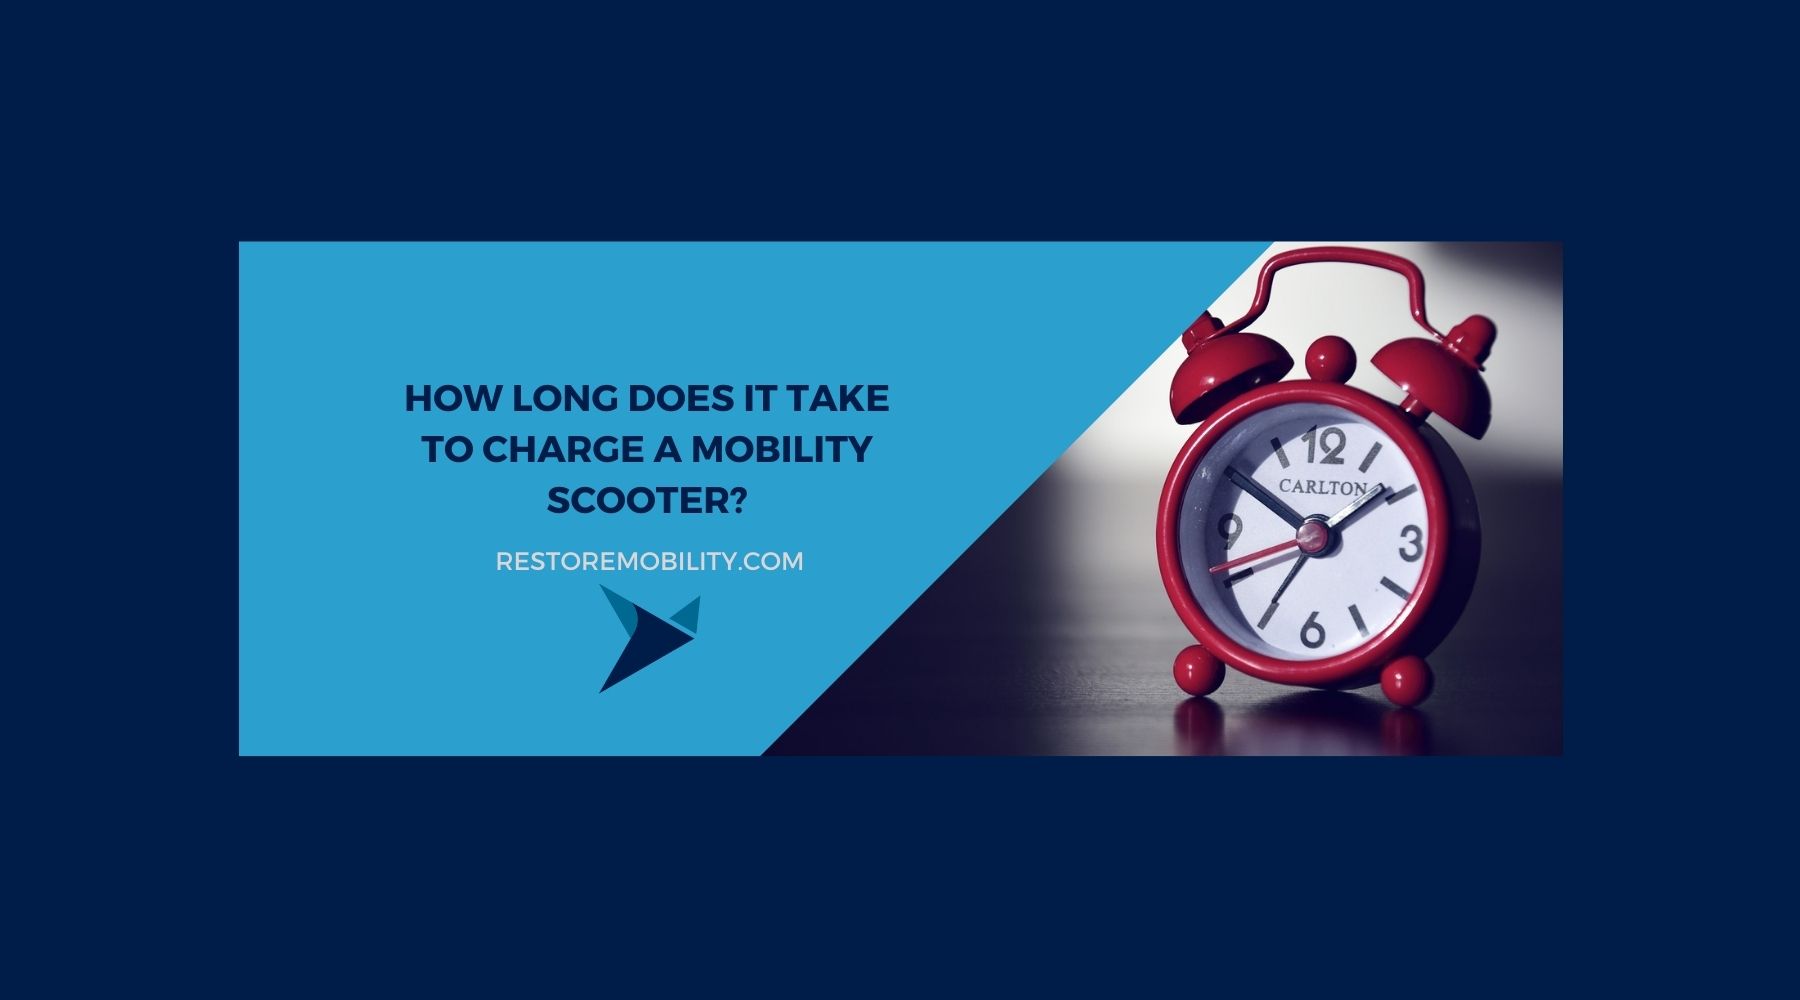 How Long Does It Take To Charge a Mobility Scooter?